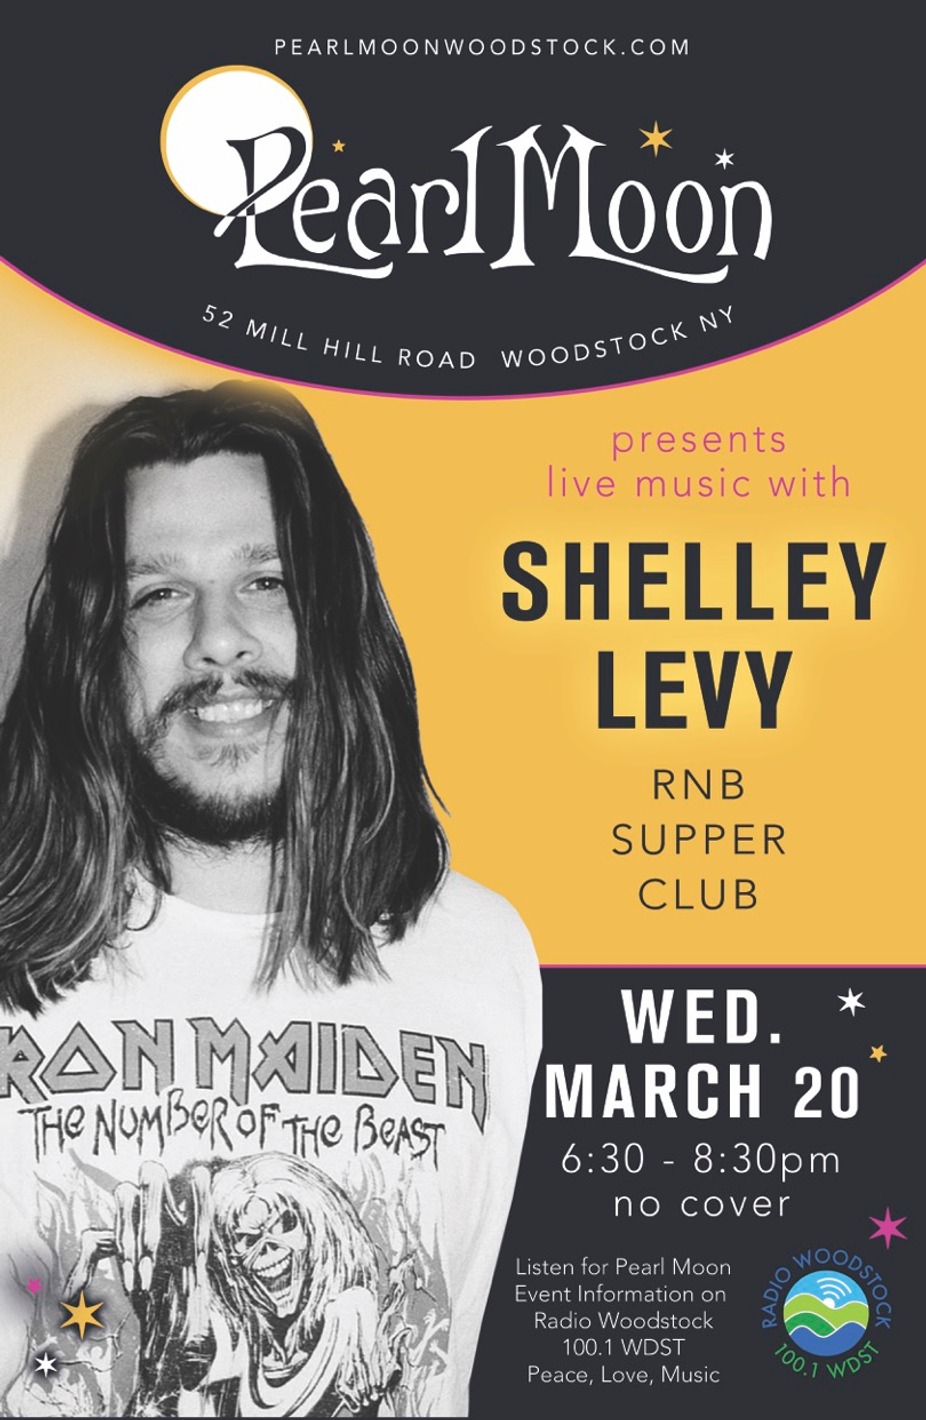 R'N'B SUPPER CLUB with SHELLEY LEVY at PEARL MOON WOODSTOCK event photo